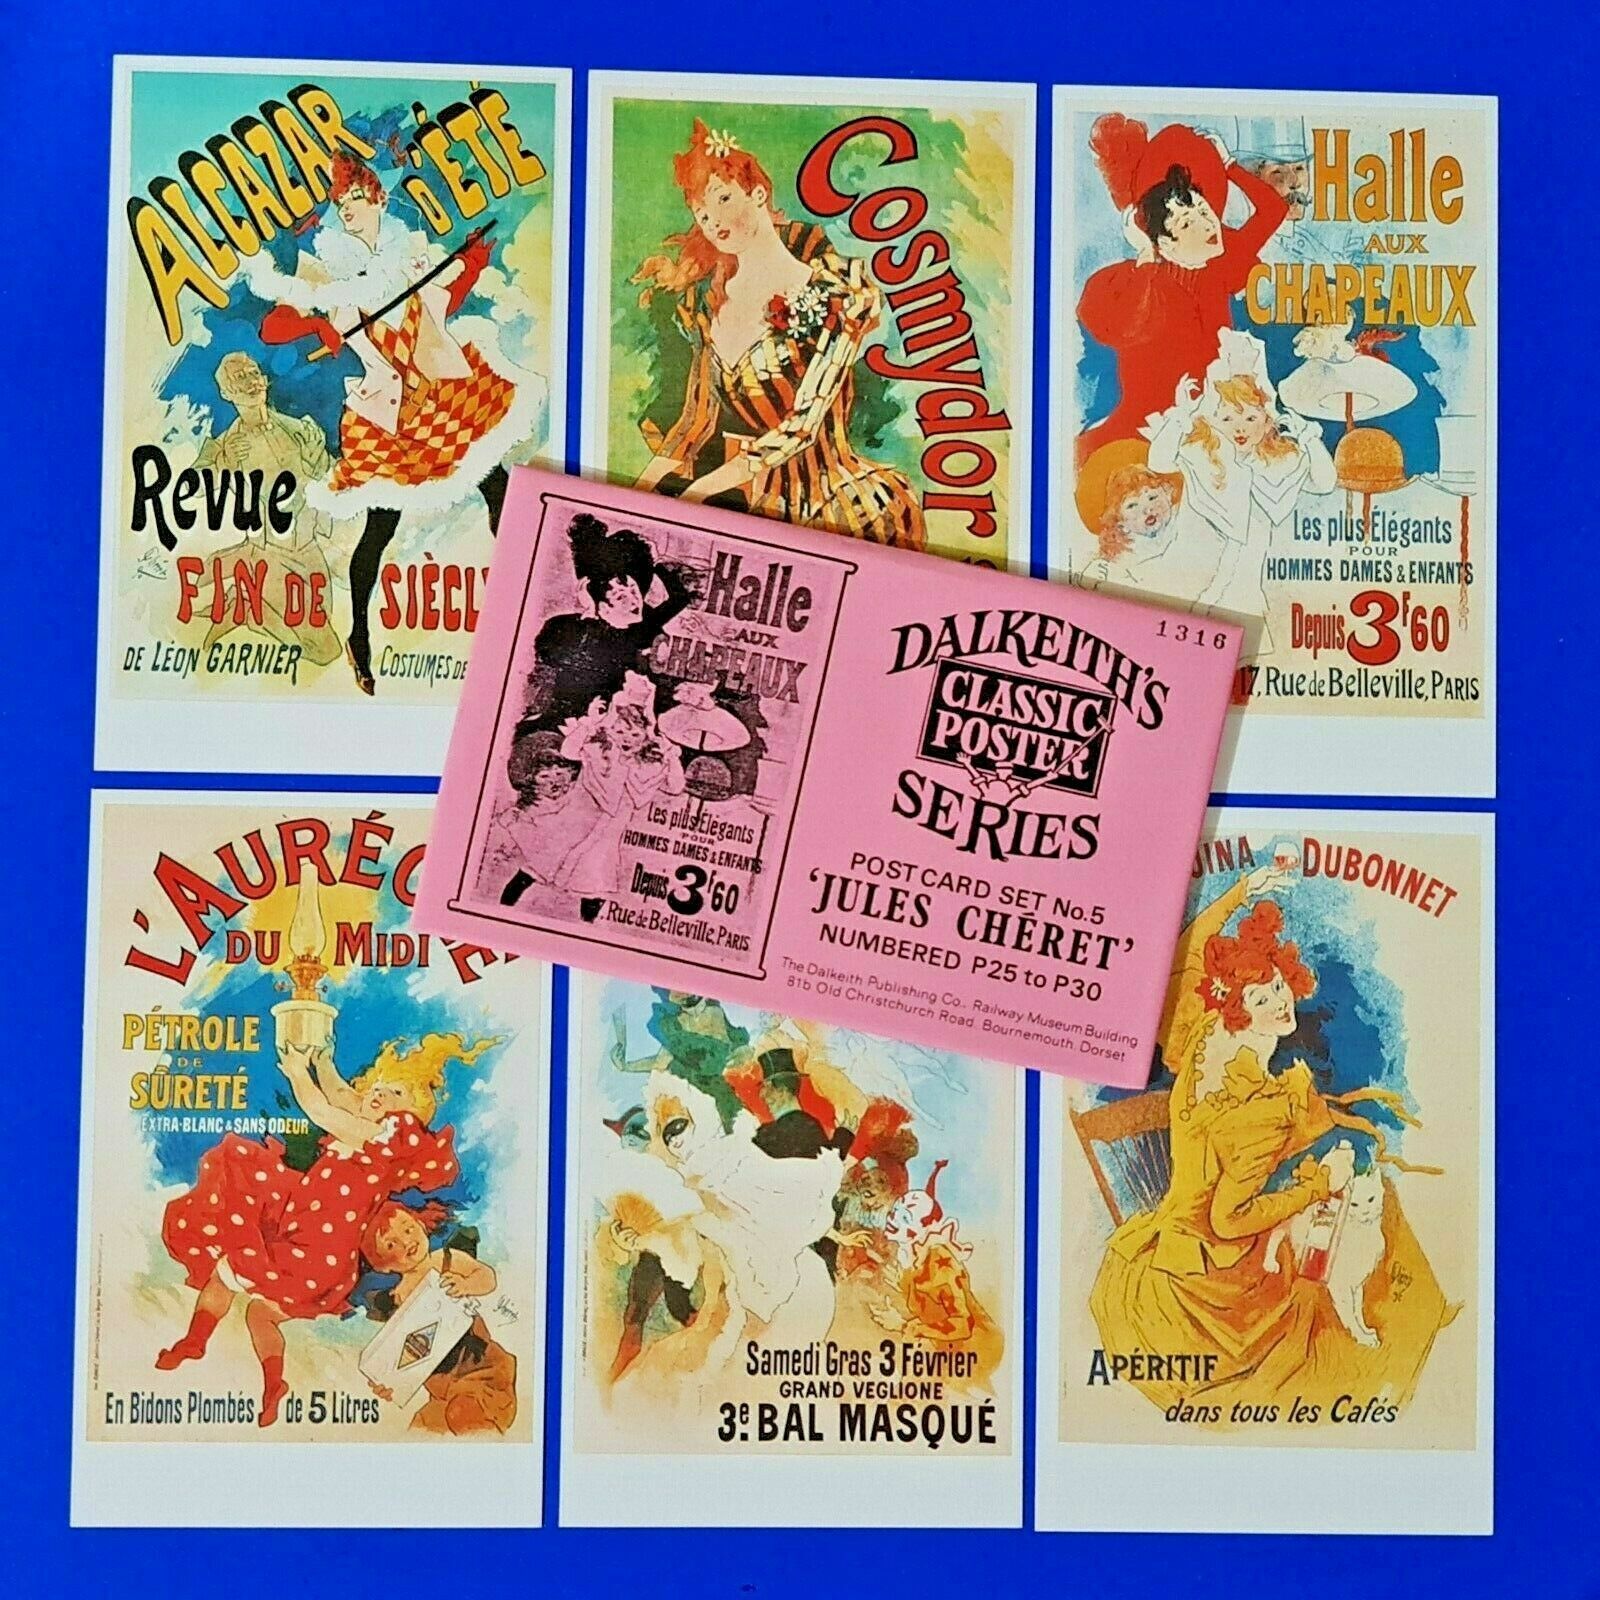 Set of 6 Dalkeith Postcards Classic Poster Series, Jules Cheret, Advertising ME9